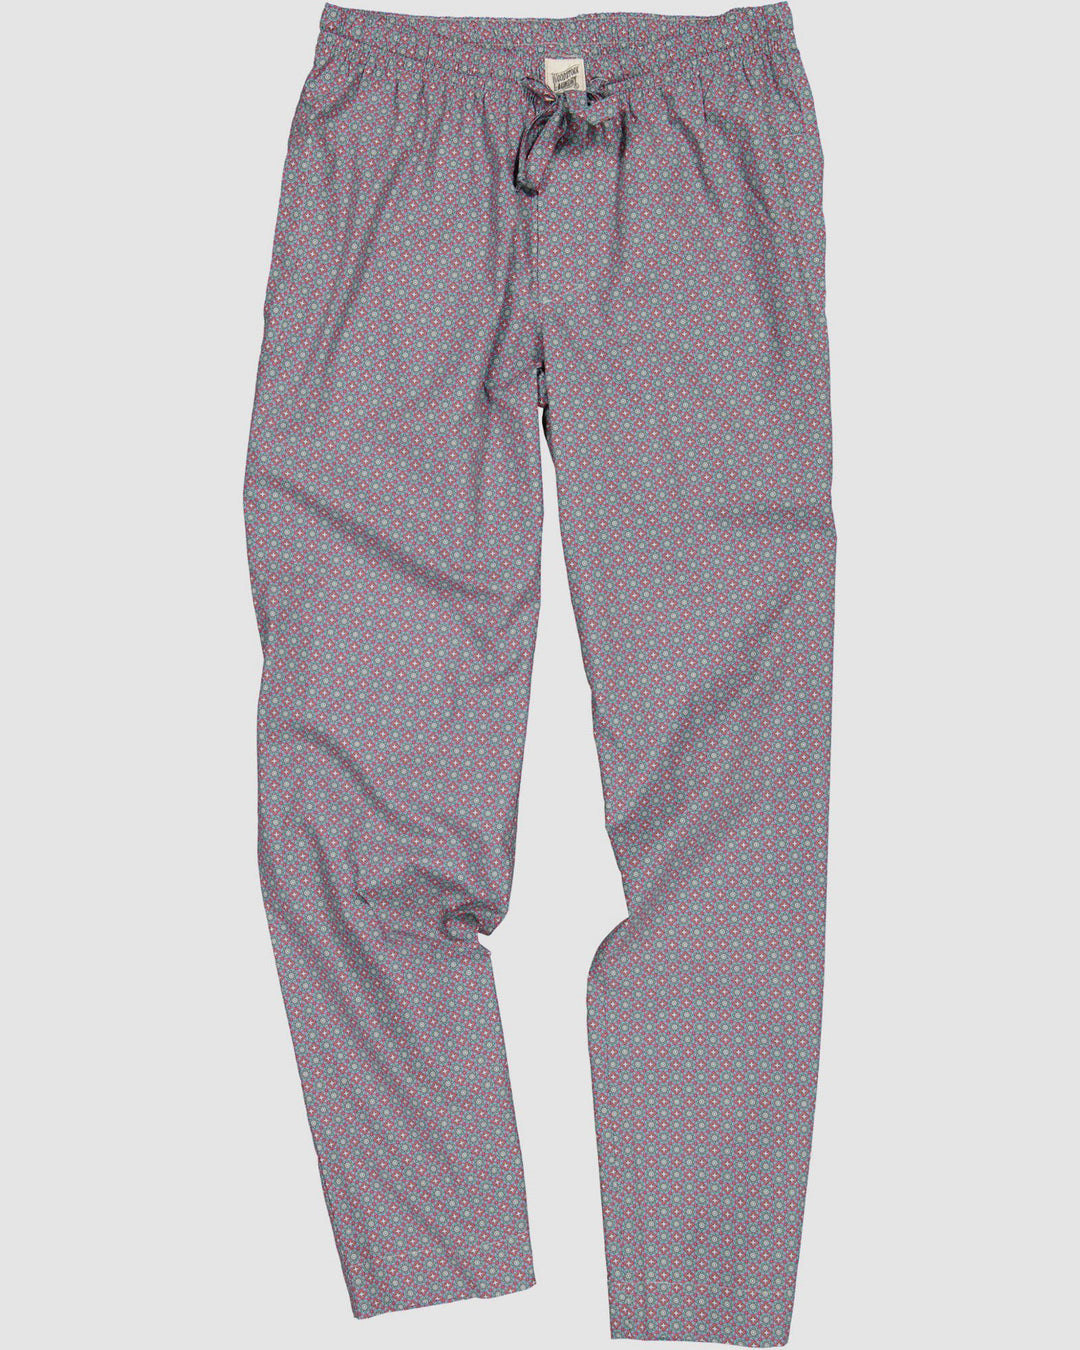 Mens Lounge Pants Morocco Front - Woodstock Laundry